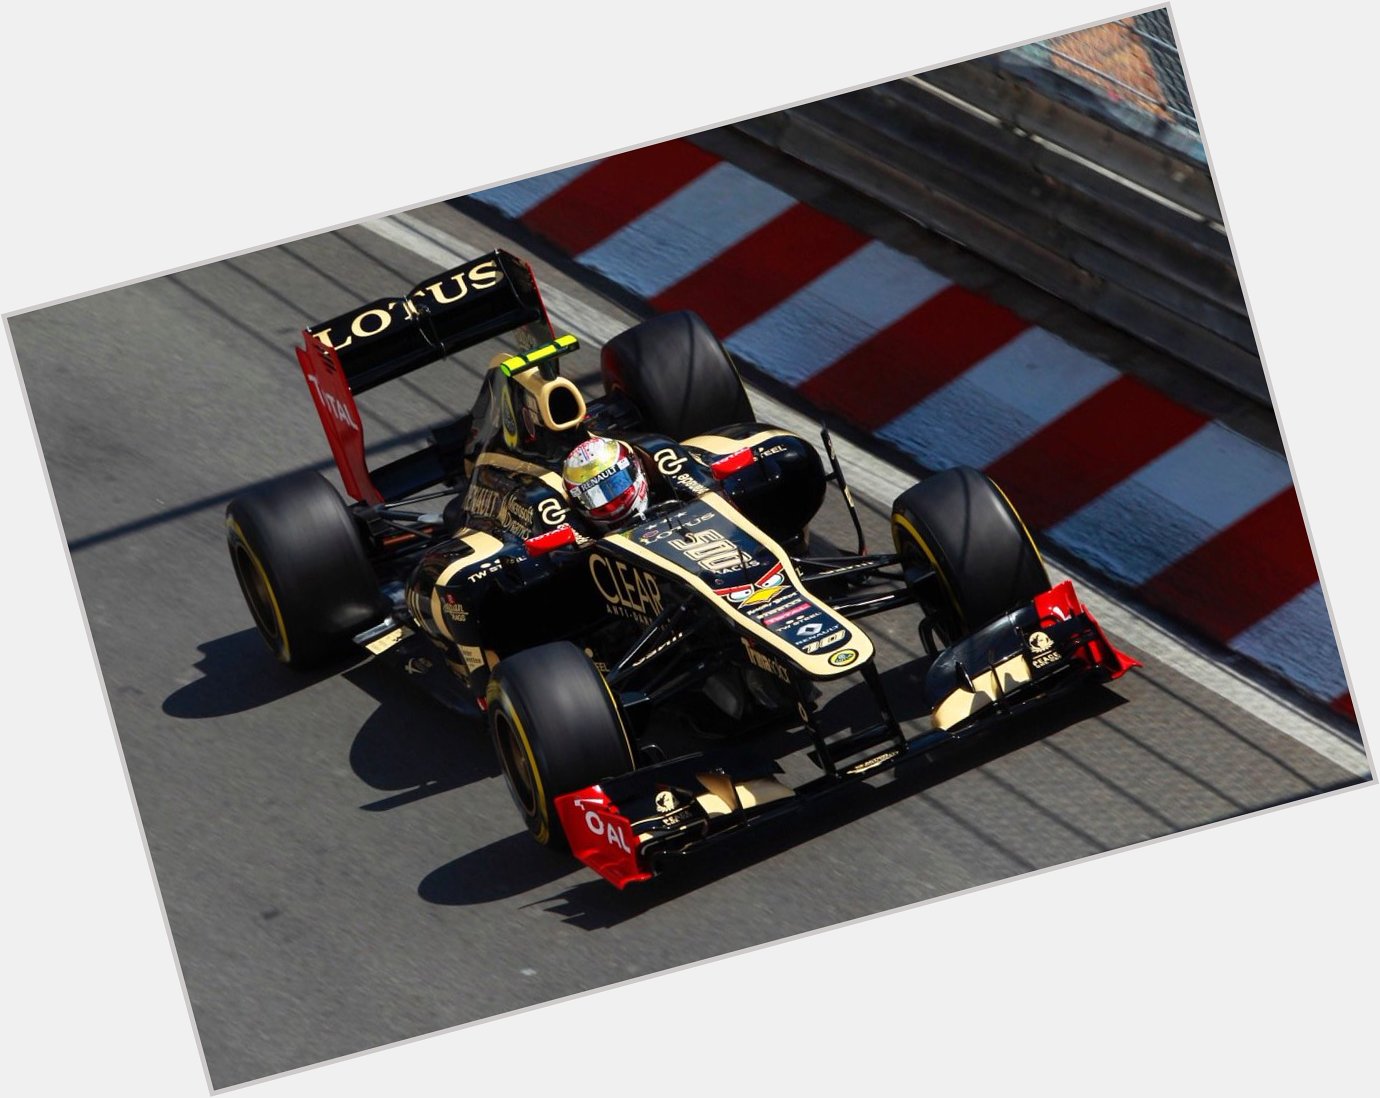 When Lotus was sponsored by Angry Birds at Monaco. Happy 32nd birthday to the Frenchman, Romain Grosjean. 